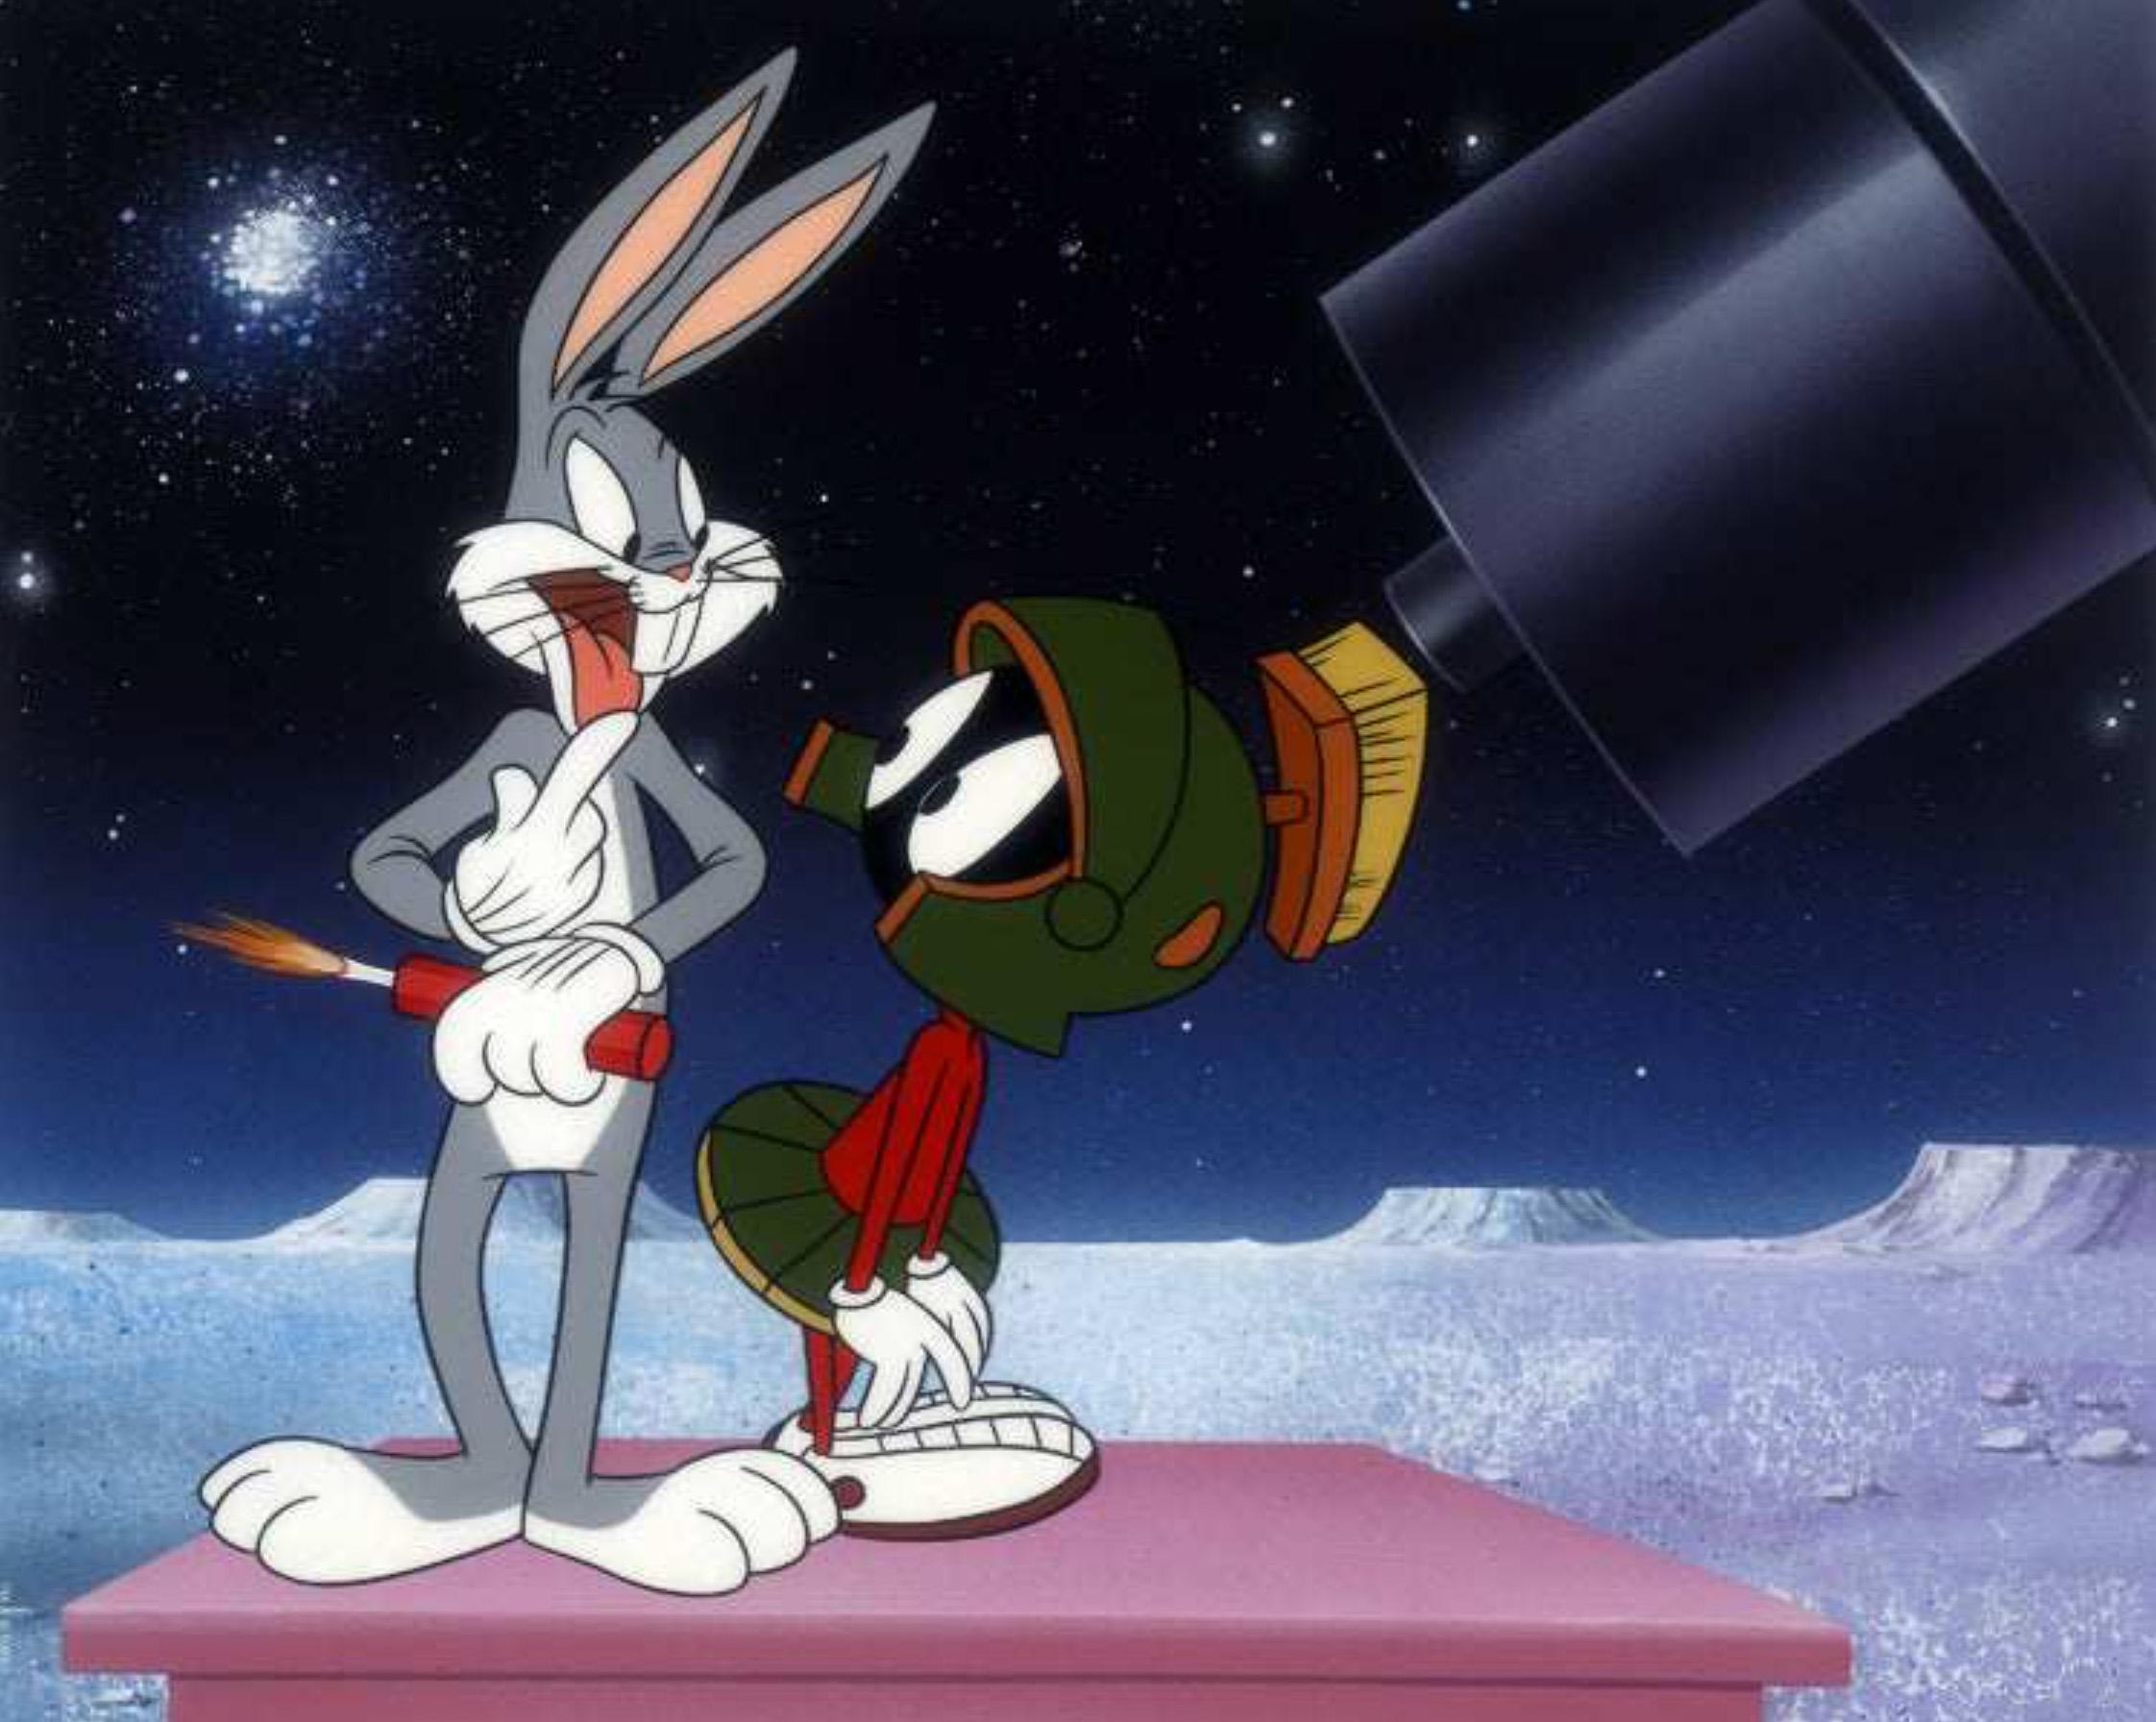 MEDIUM: Gicleé on Fine Art Paper
EDITION SIZE: 250
IMAGE SIZE: 12” x 9.5”
ITEM NUMBER:  CP1494

Before man went to the moon, it took the efforts of many animals to go where no human had gone before. Director Chuck Jones in the 1948 short, “Haredevil